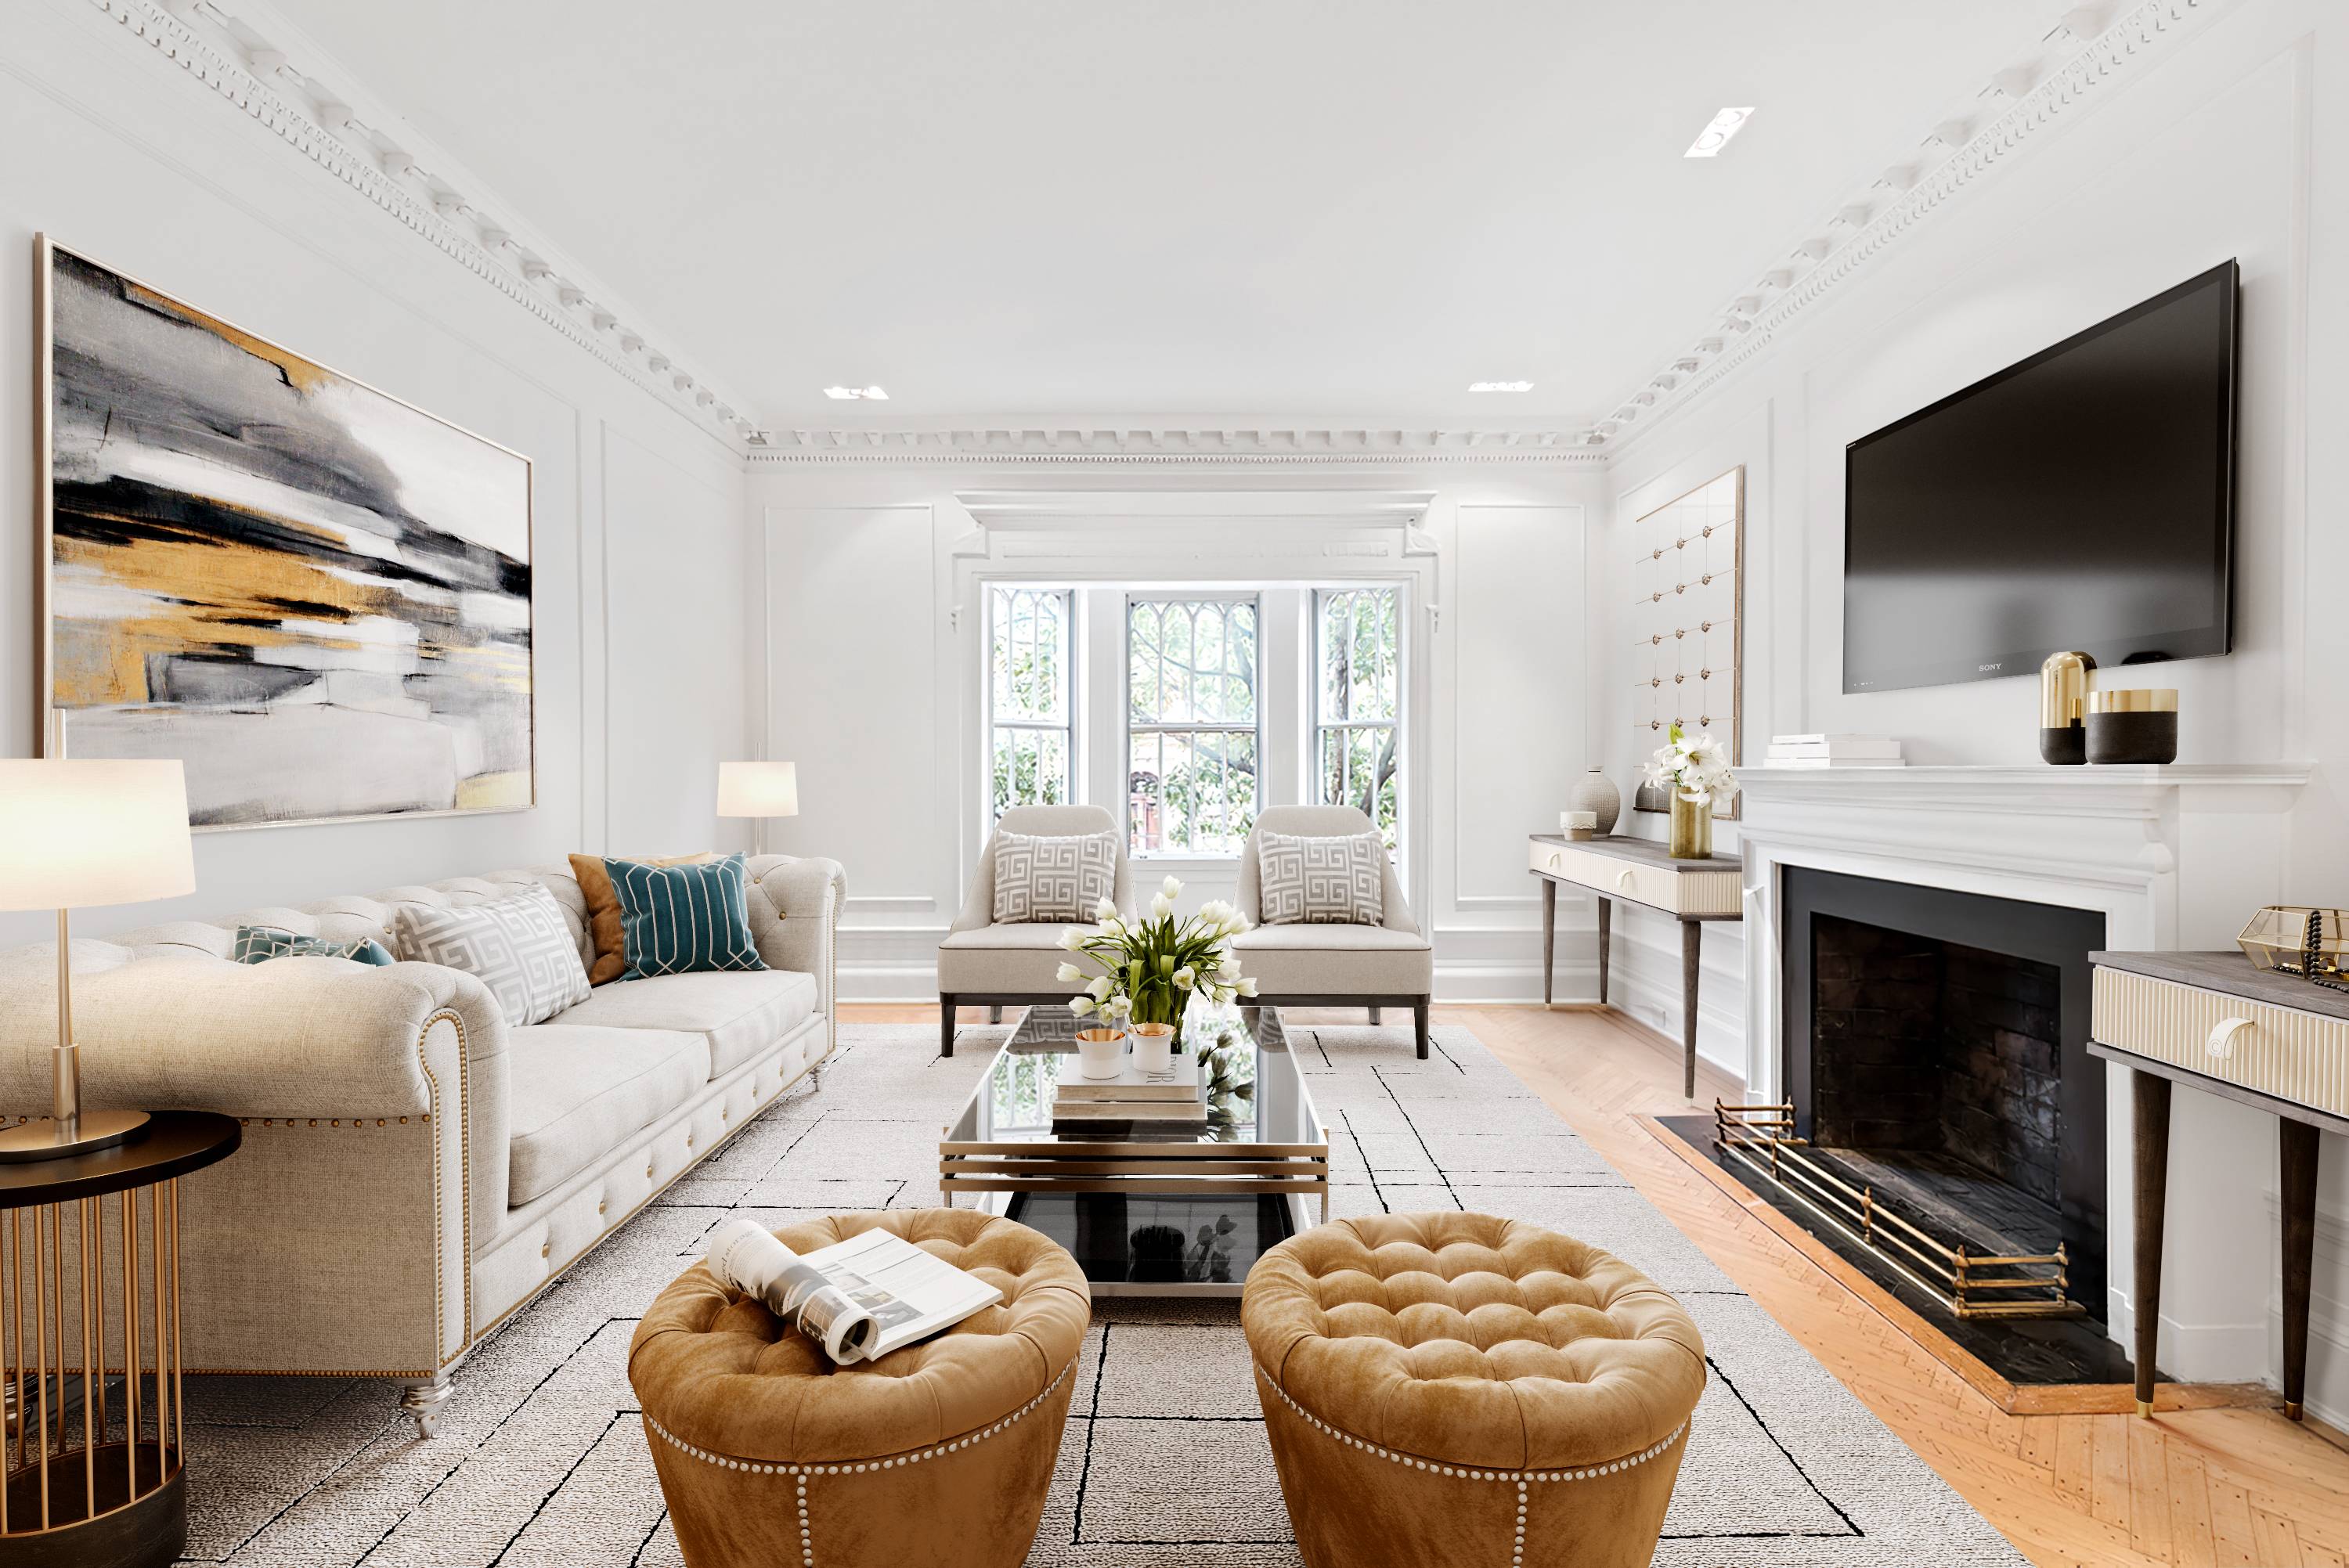 LIMESTONE ELEGANCE IN OUR PARK SLOPE TOWNHOME